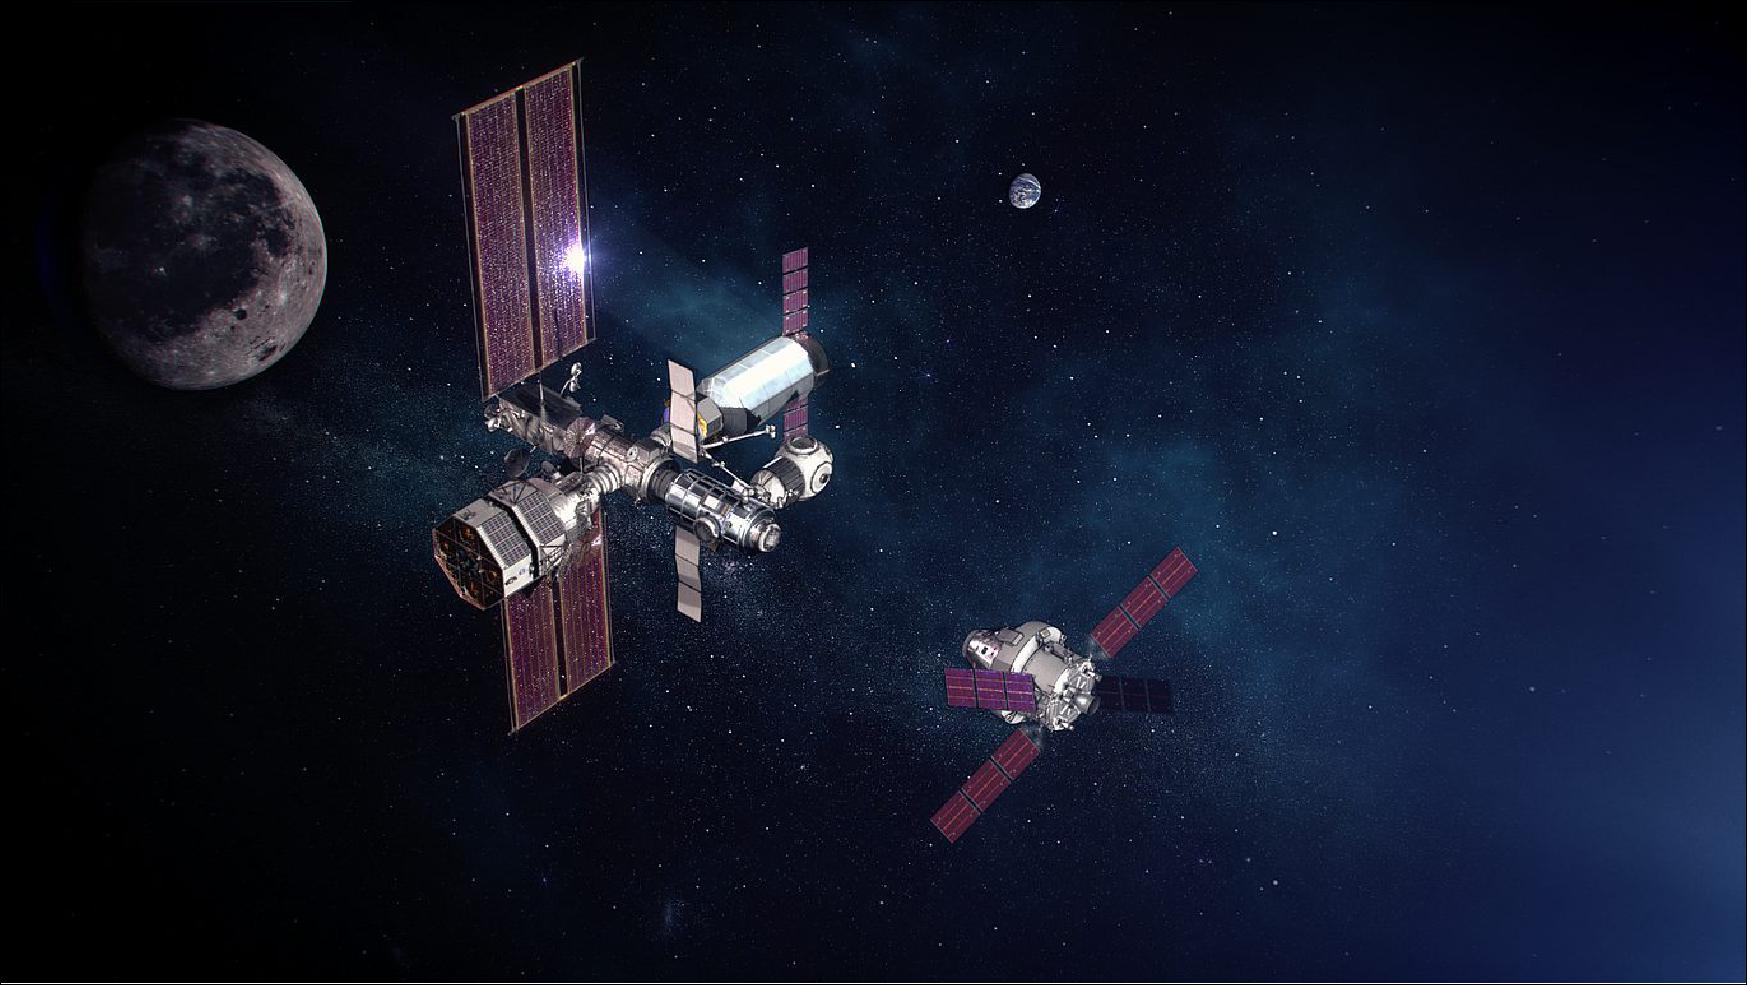 Figure 31: Illustration of the Gateway, an outpost orbiting the Moon that will provide vital support for NASA's Artemis missions (image credit: NASA)